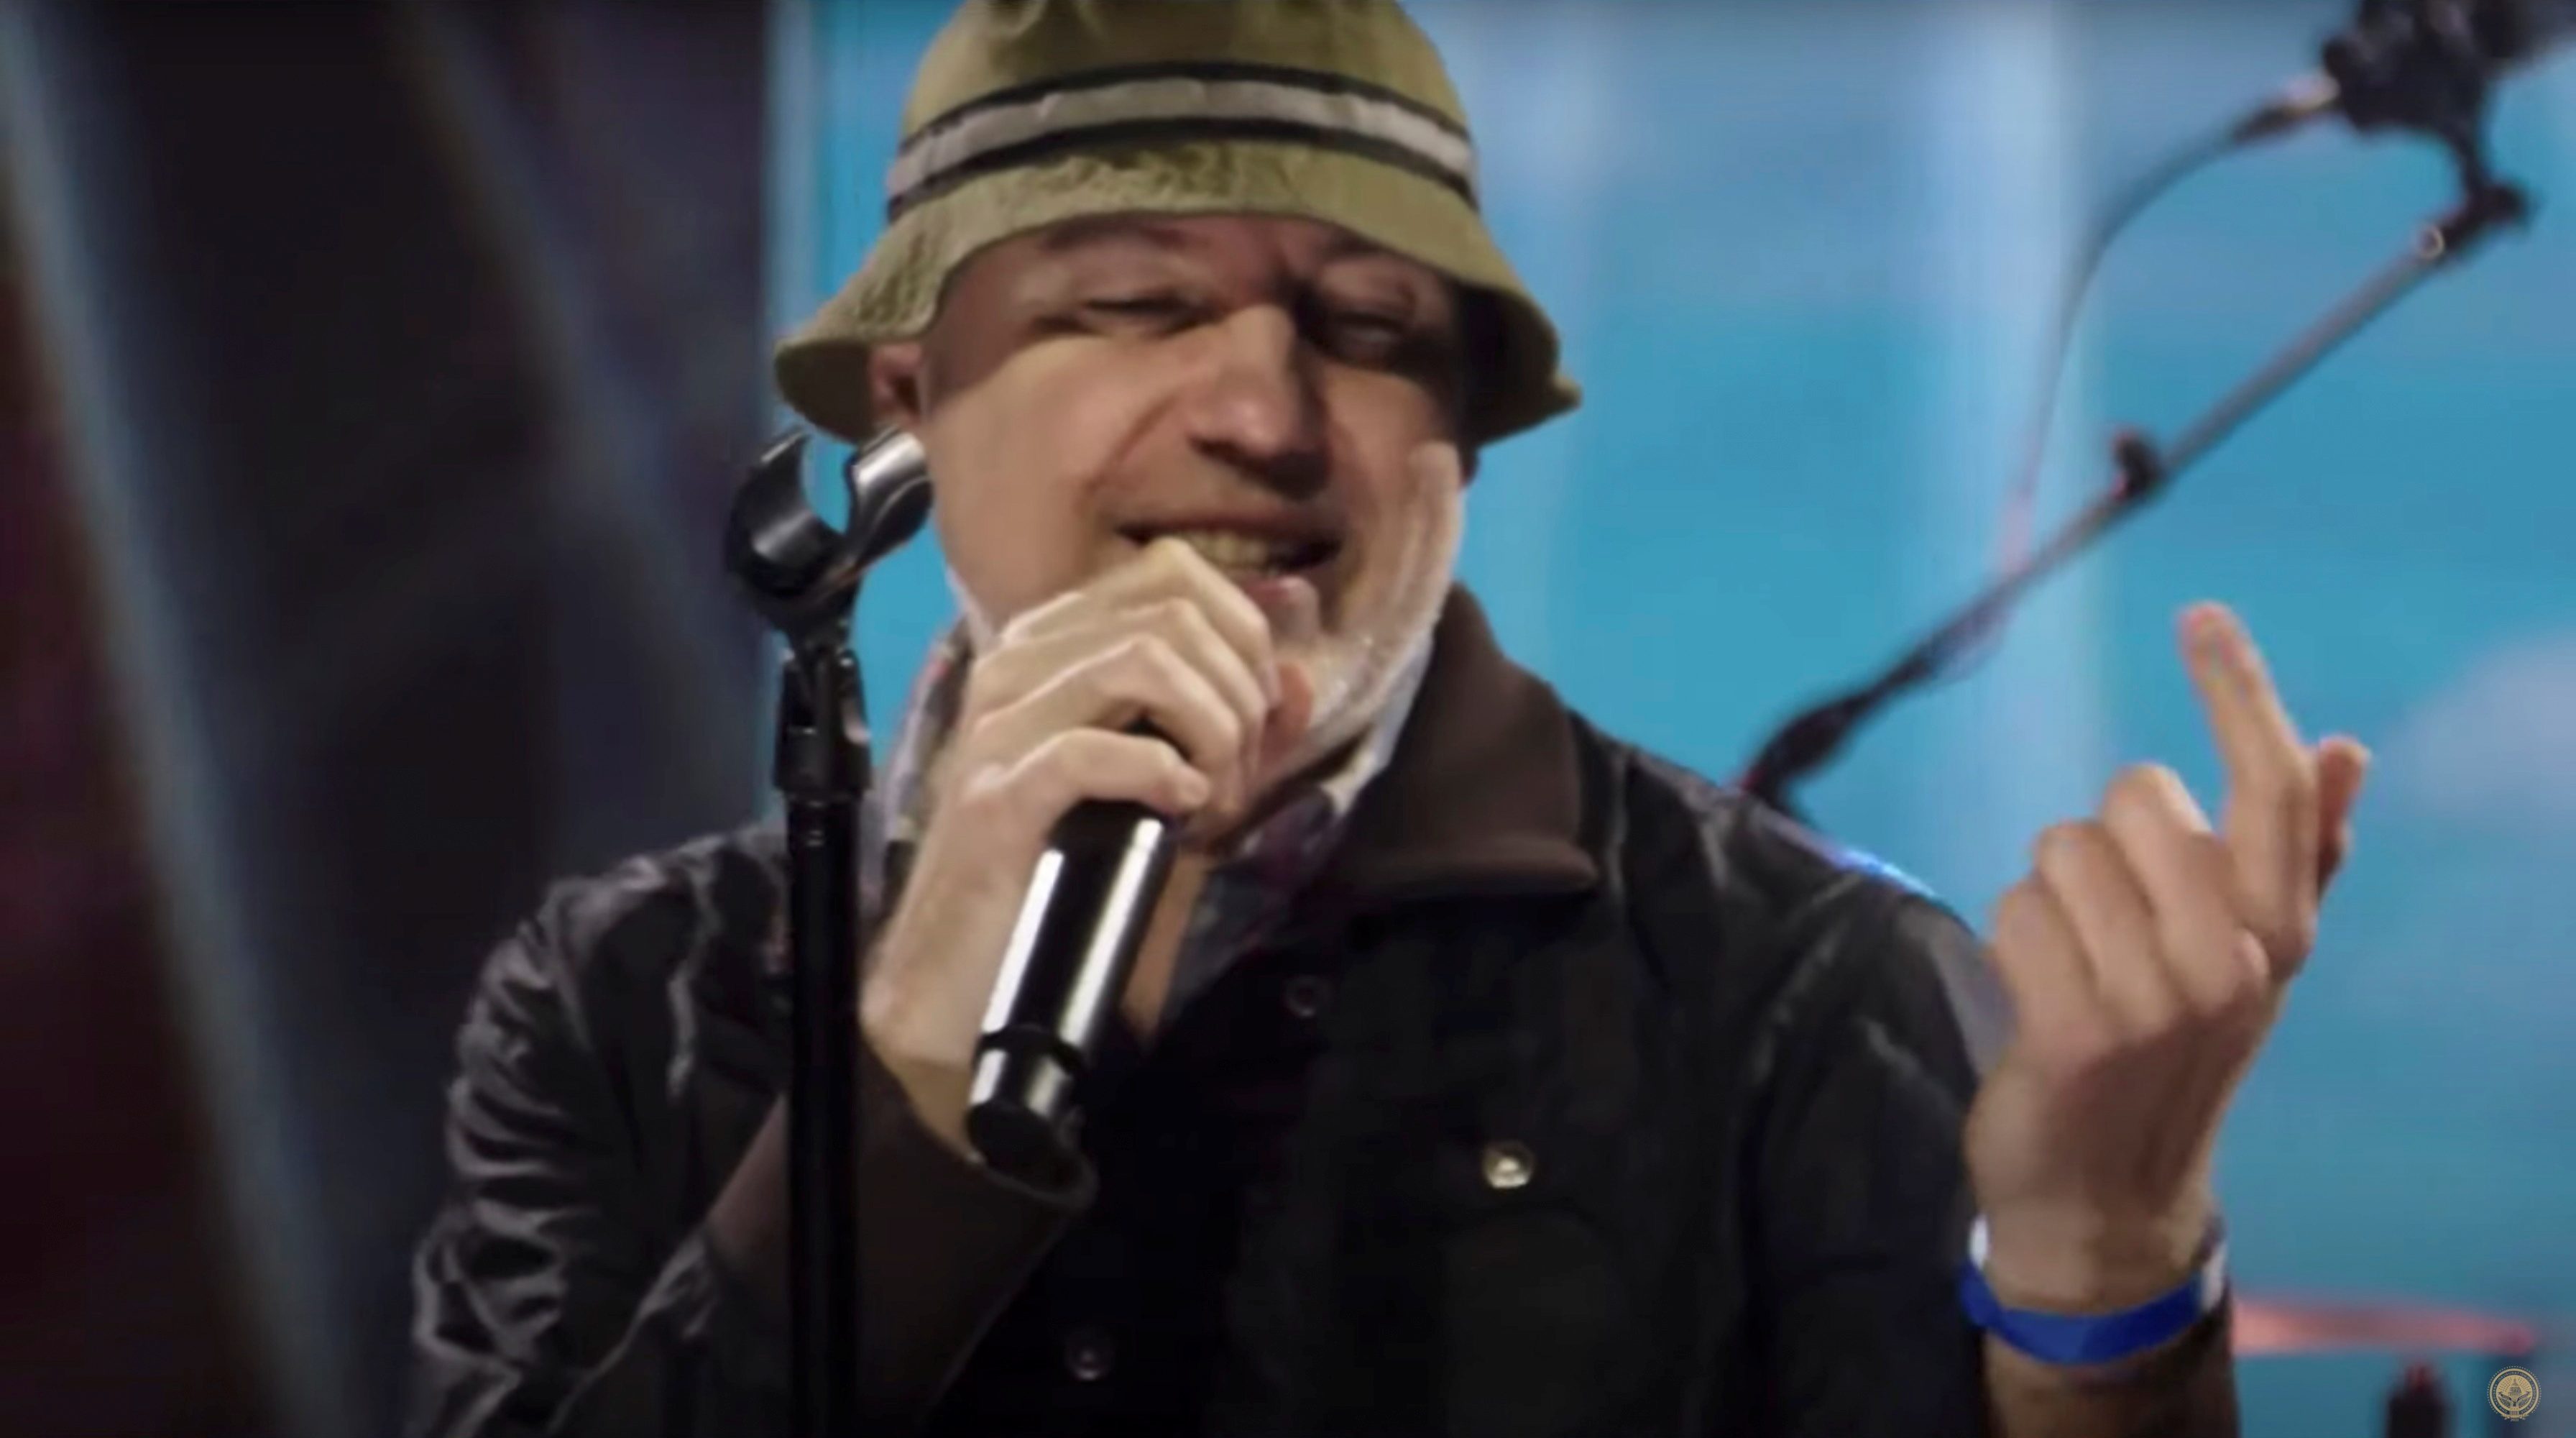 WATCH: New Radicals perform ‘You Get What You Give’ during Biden-Harris inaugural parade